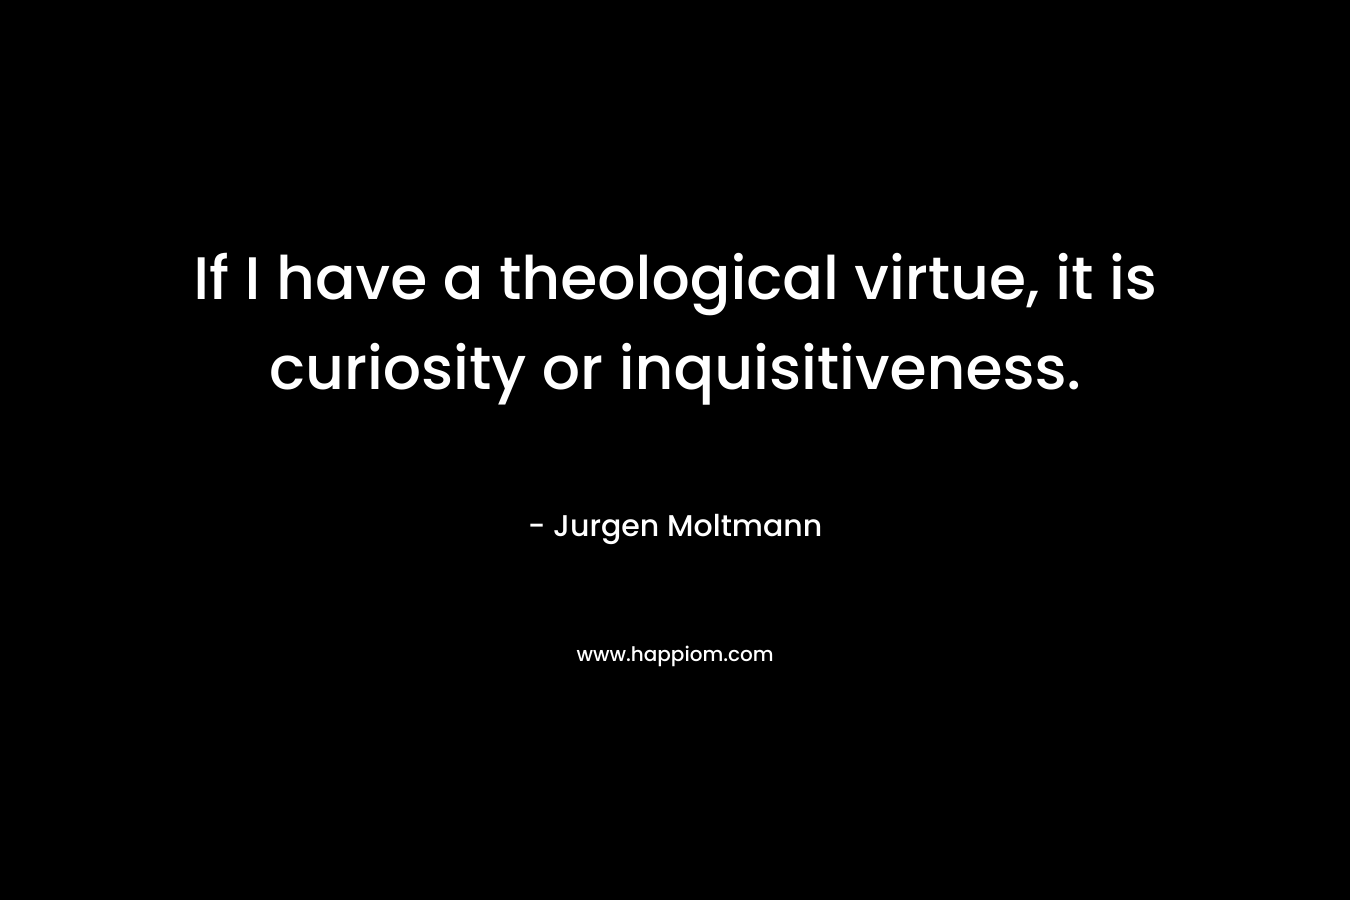 If I have a theological virtue, it is curiosity or inquisitiveness. – Jurgen Moltmann